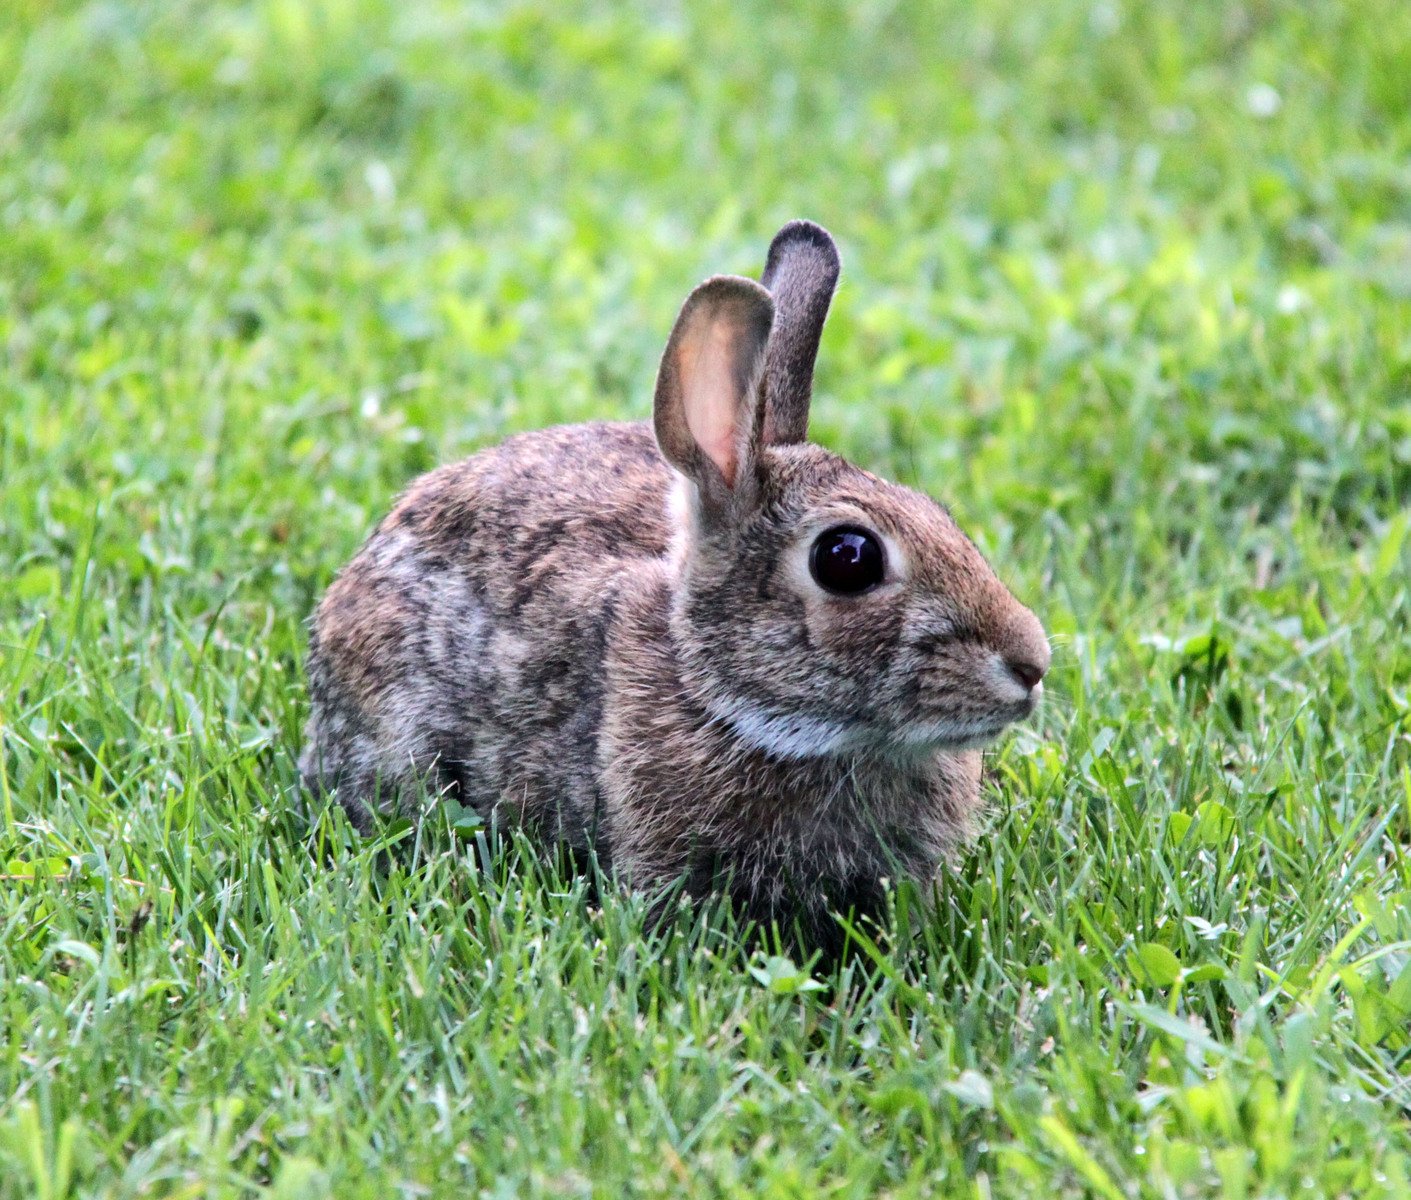 small rabbit in green grass with a black eye